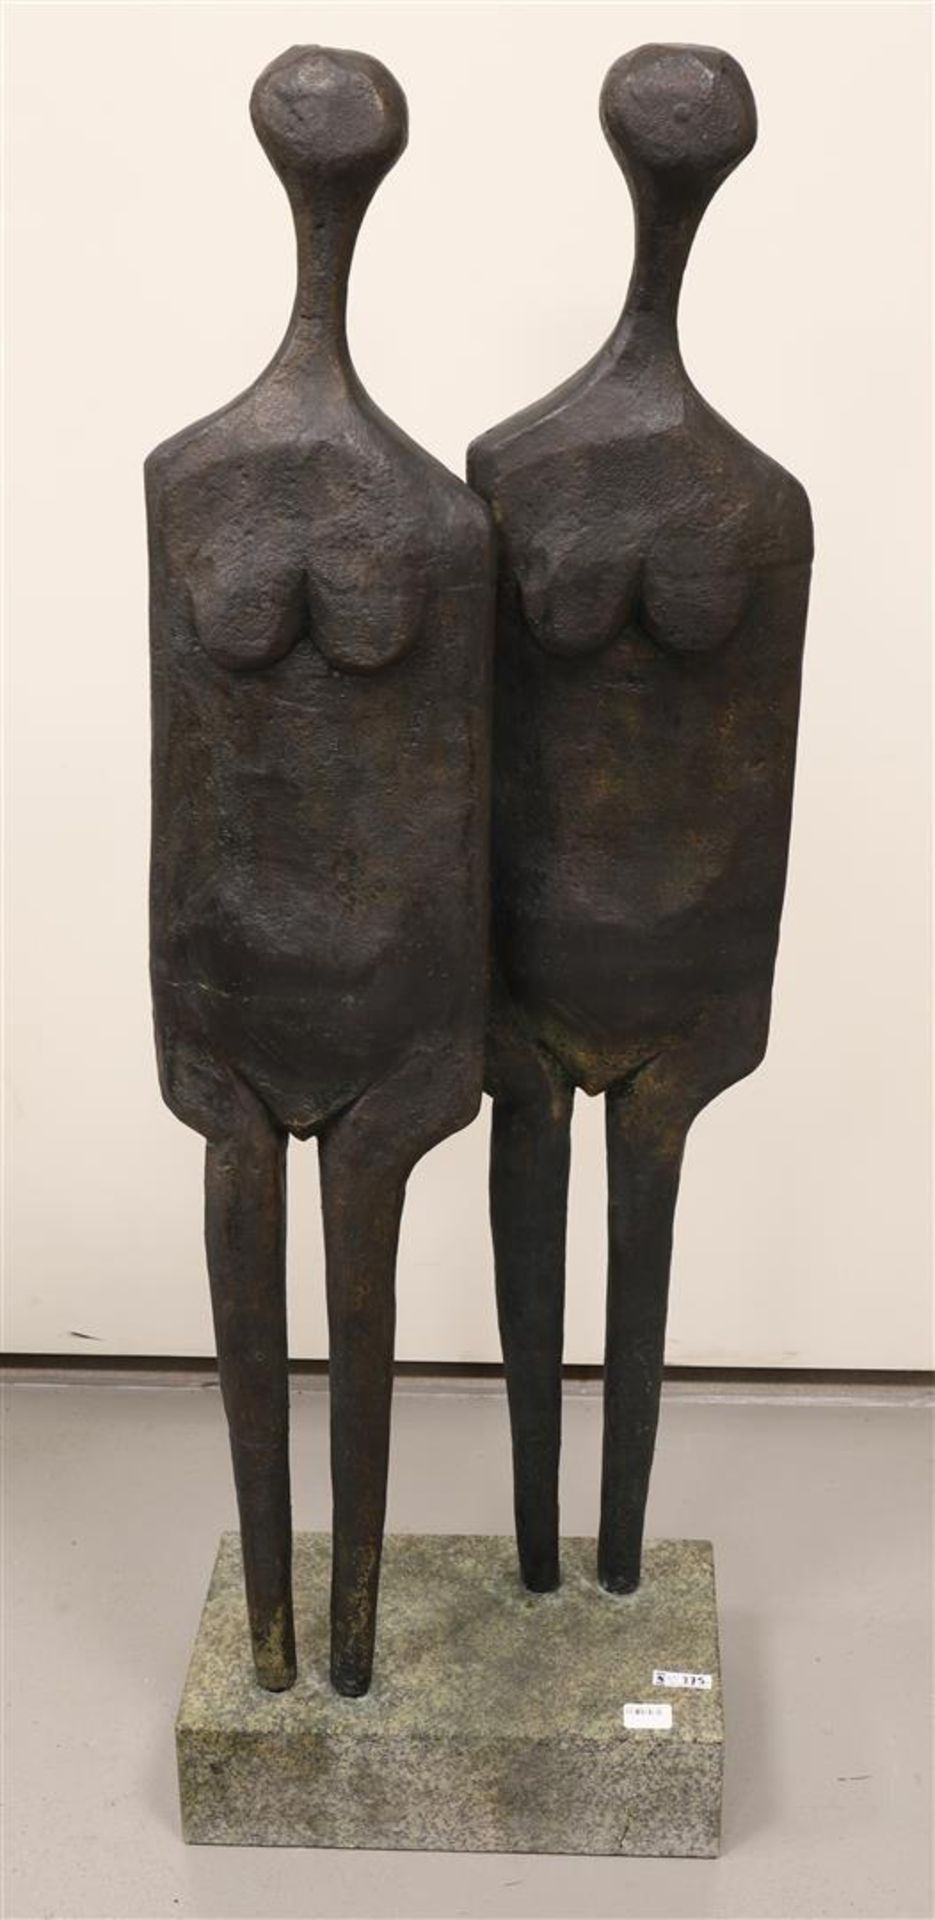 A brown patinated bronze pair of standing figures on a natural stone base.